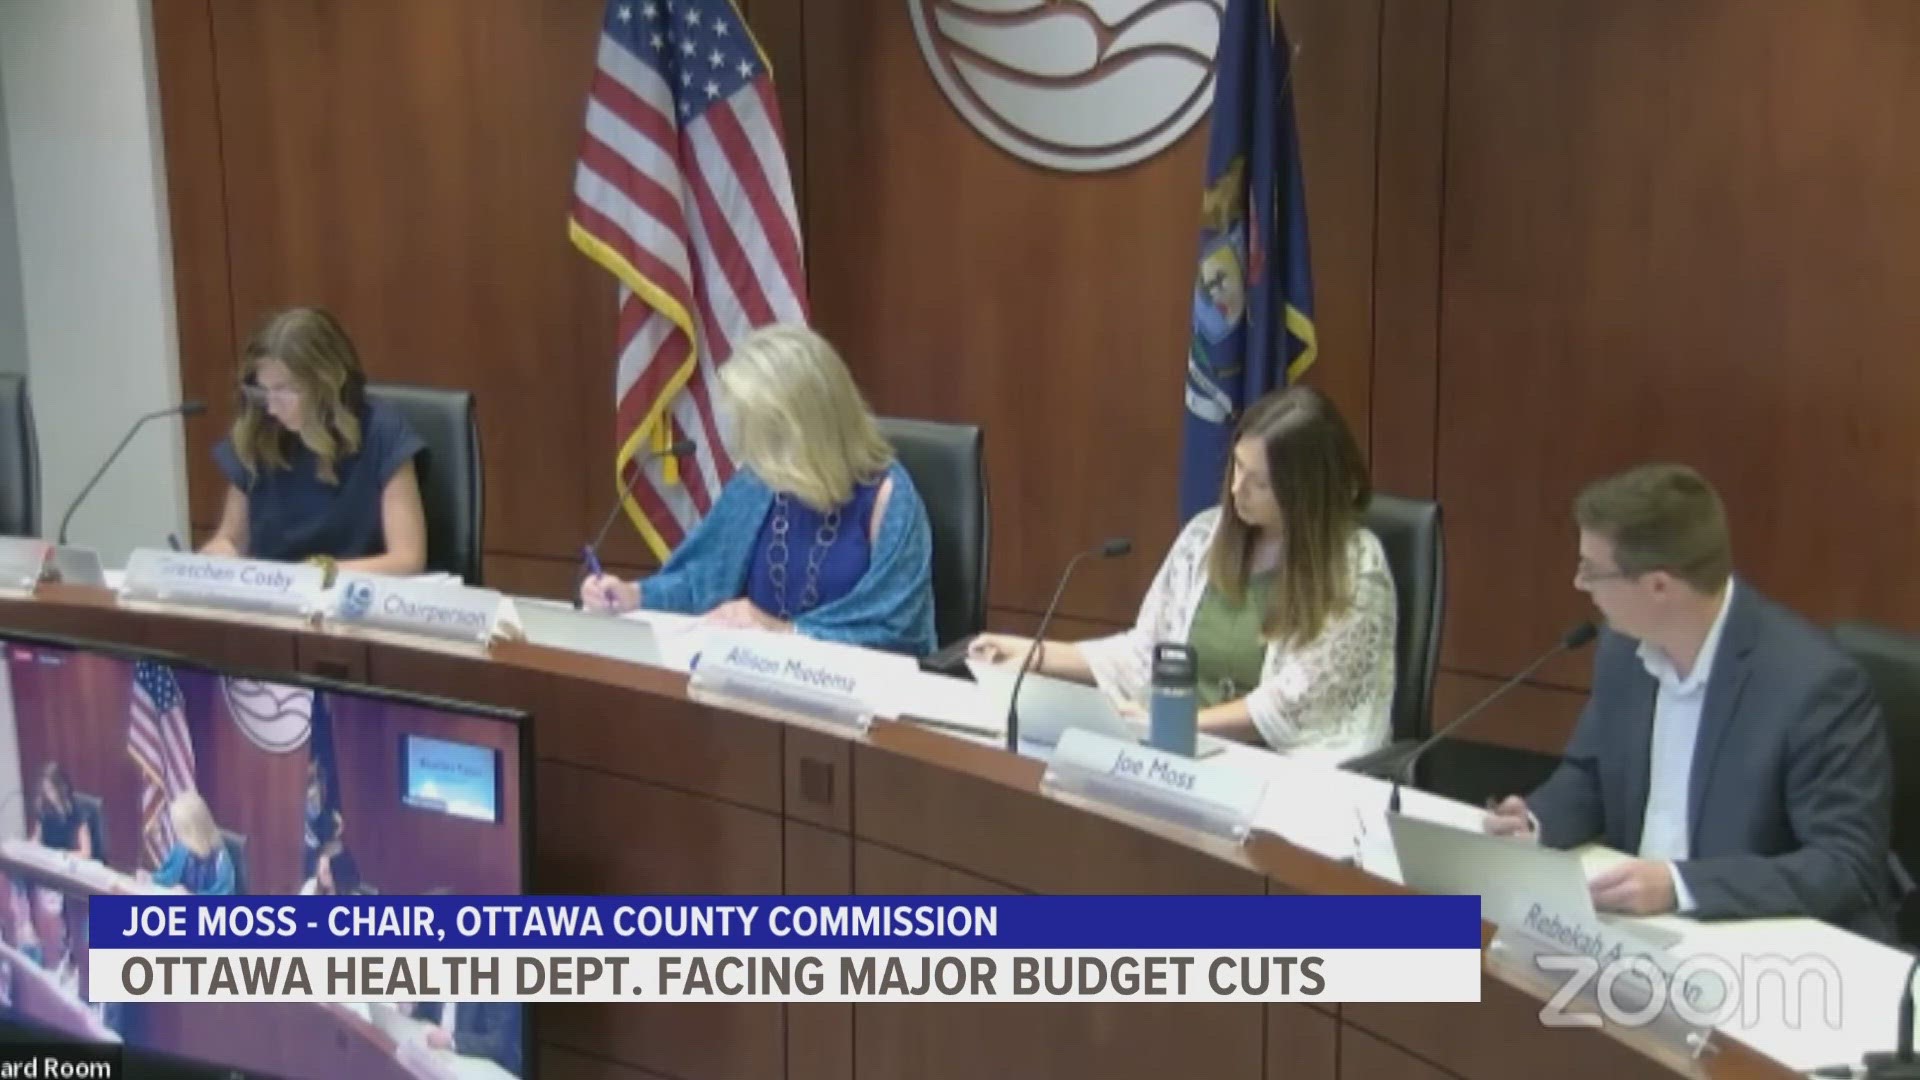 Health officers said a new budget under this request could cause the health department to close their doors just weeks into the new fiscal year.